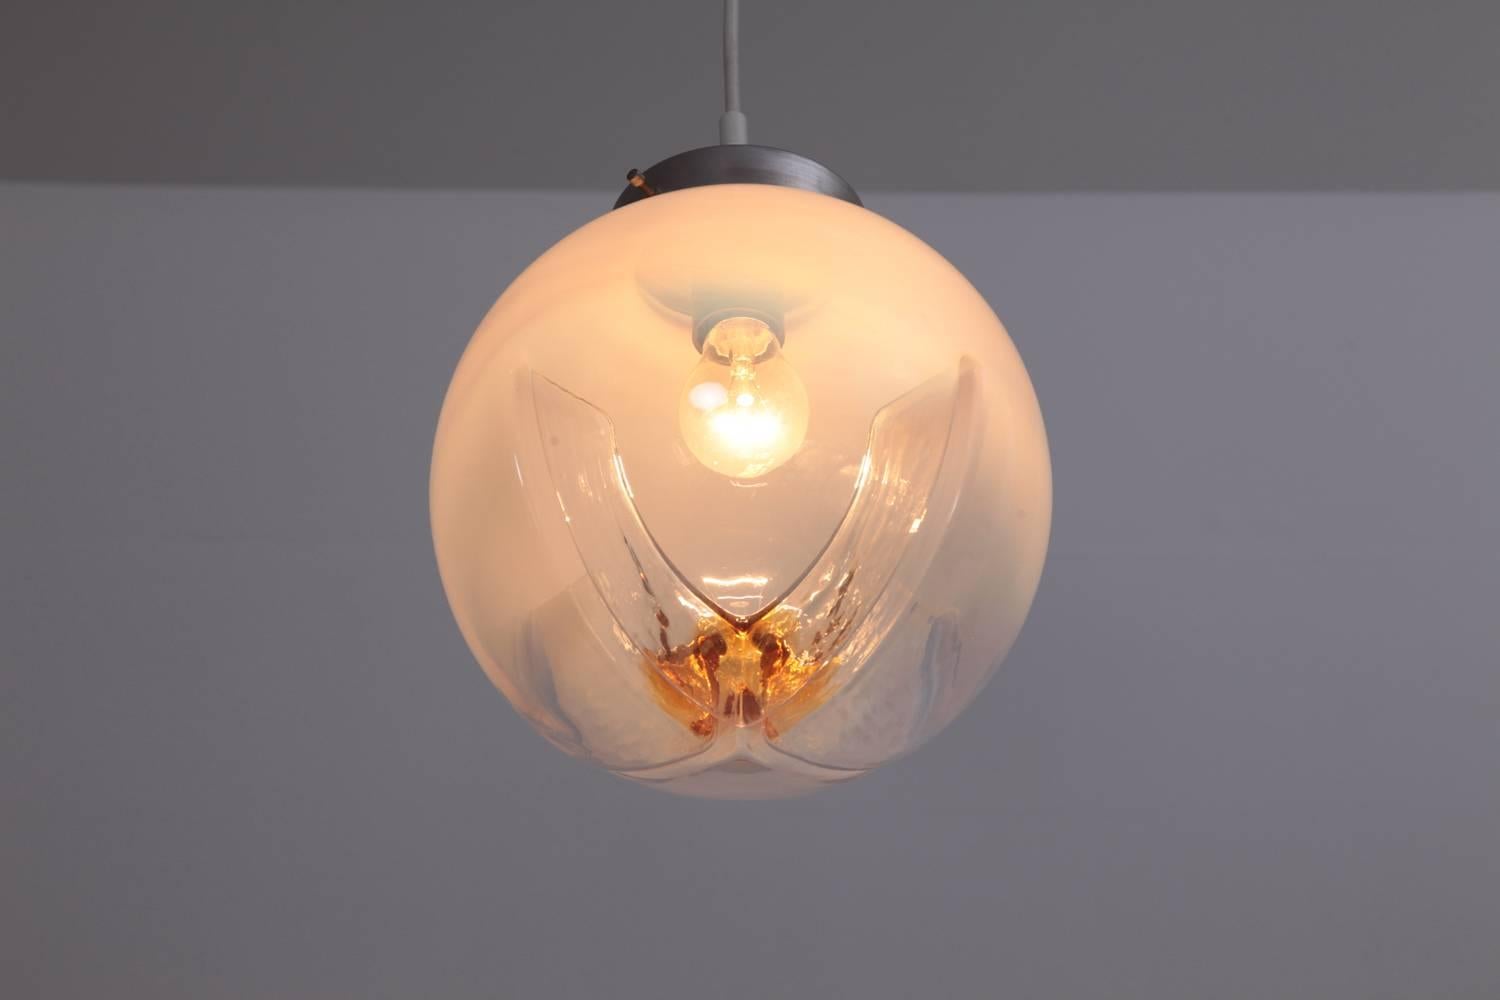 1970s pendant lamp with globes of frosted-to-clear glass with amber inclusions by Mazzega.
To be on the the safe side, the lamp should be checked locally by a specialist concerning local requirements.